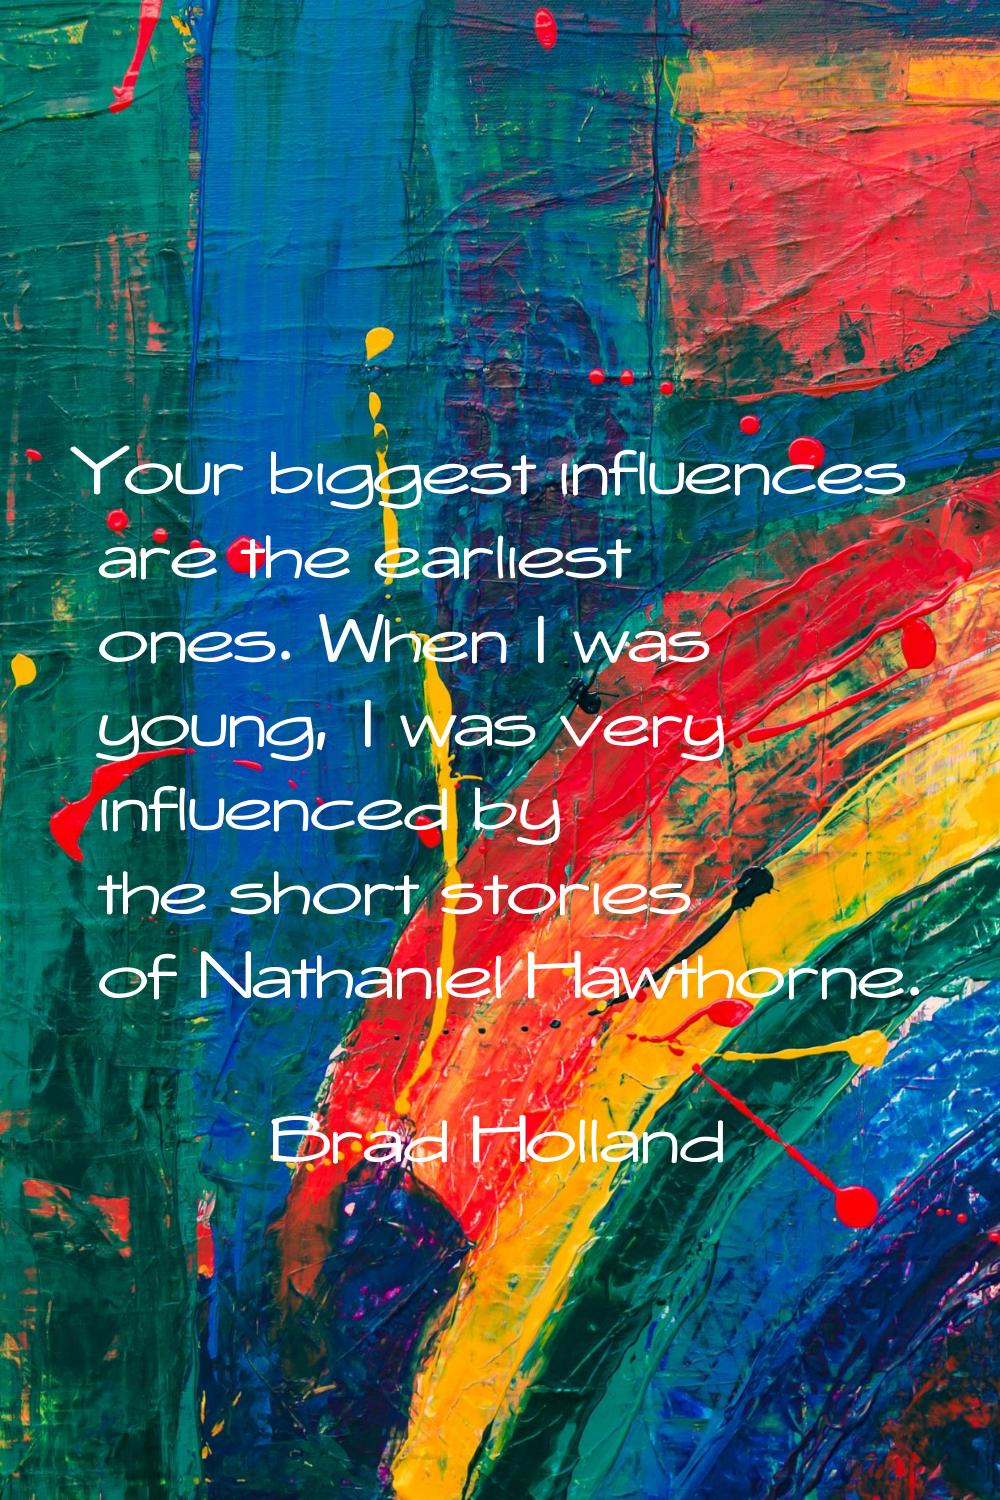 Your biggest influences are the earliest ones. When I was young, I was very influenced by the short